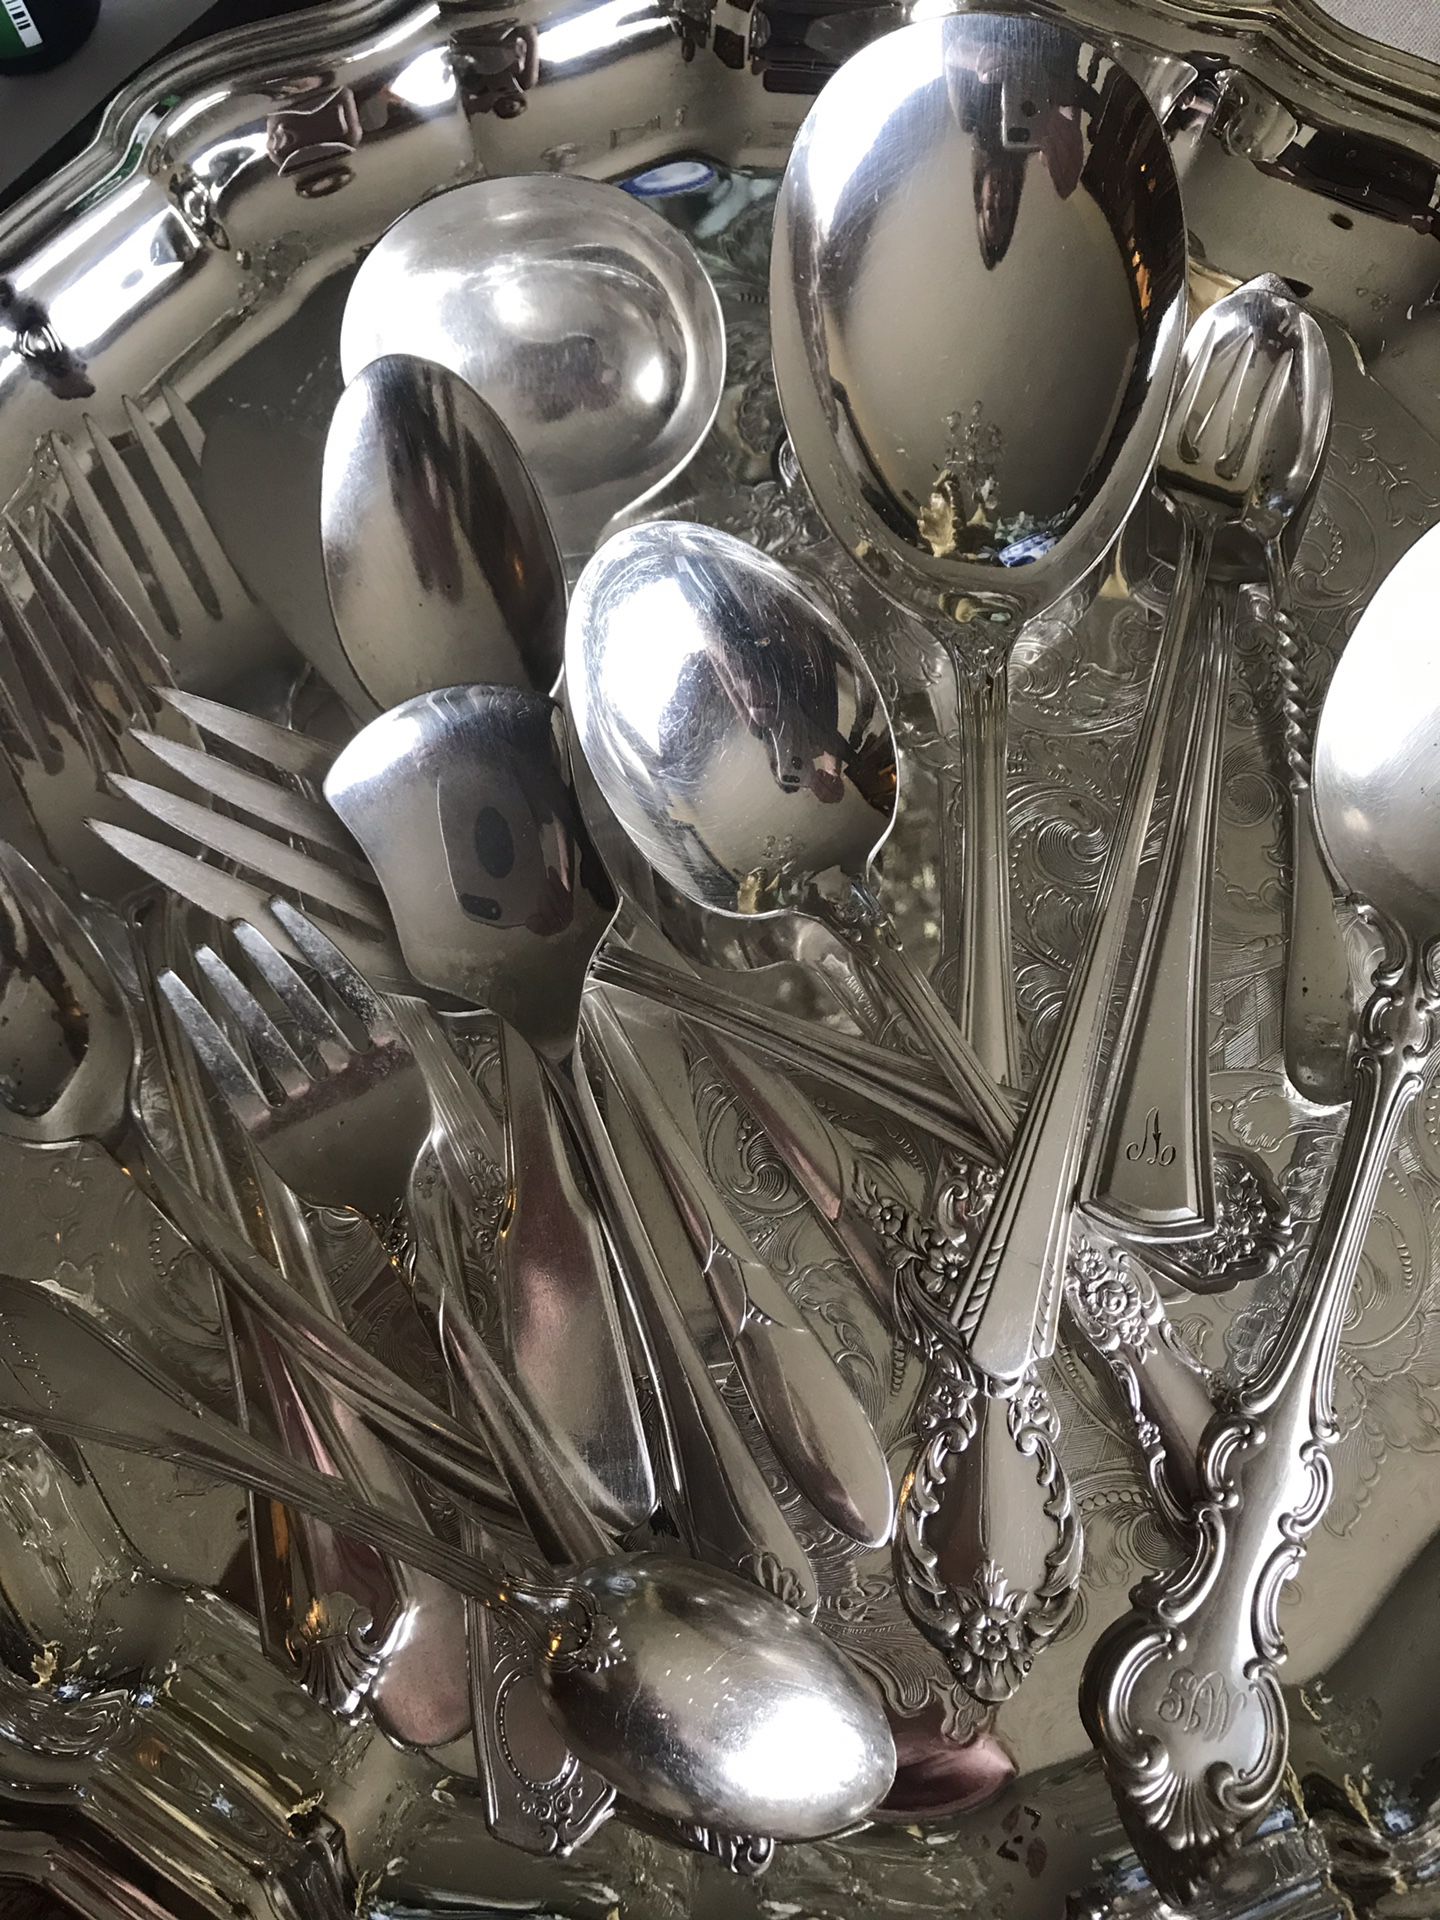 Vintage silverplated silverware and serving pieces